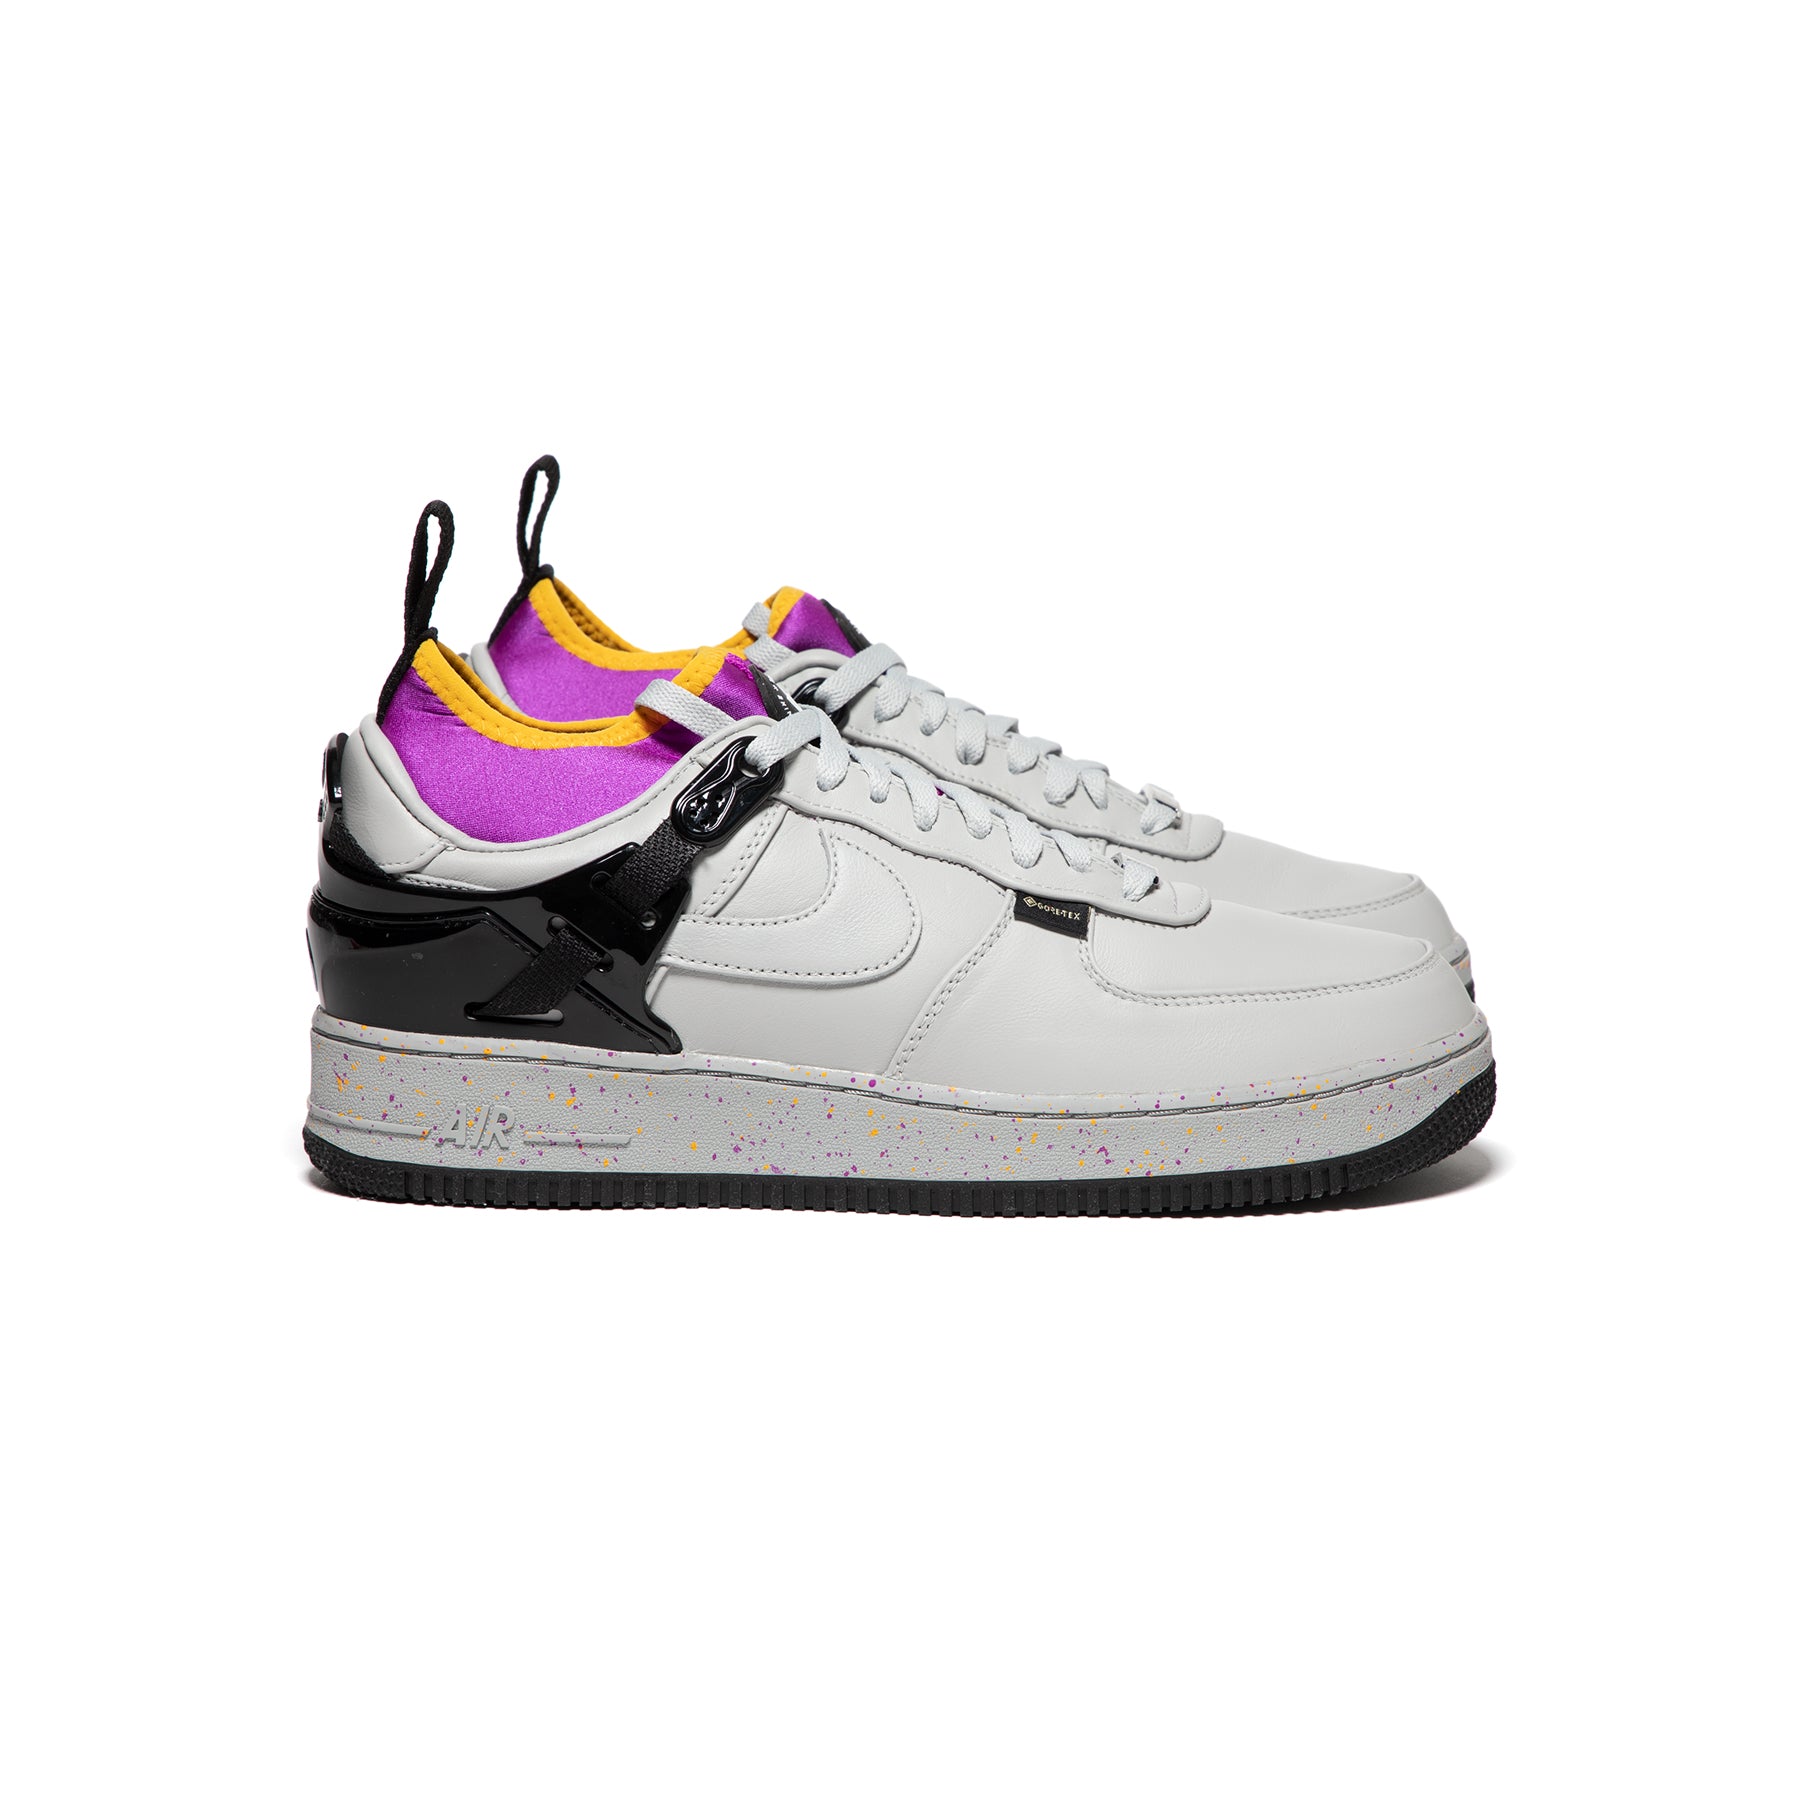 Casi Travieso Oculto Nike x UNDERCOVER Air Force 1 Low SP (Grey Fog/Black/University Gold) –  Concepts